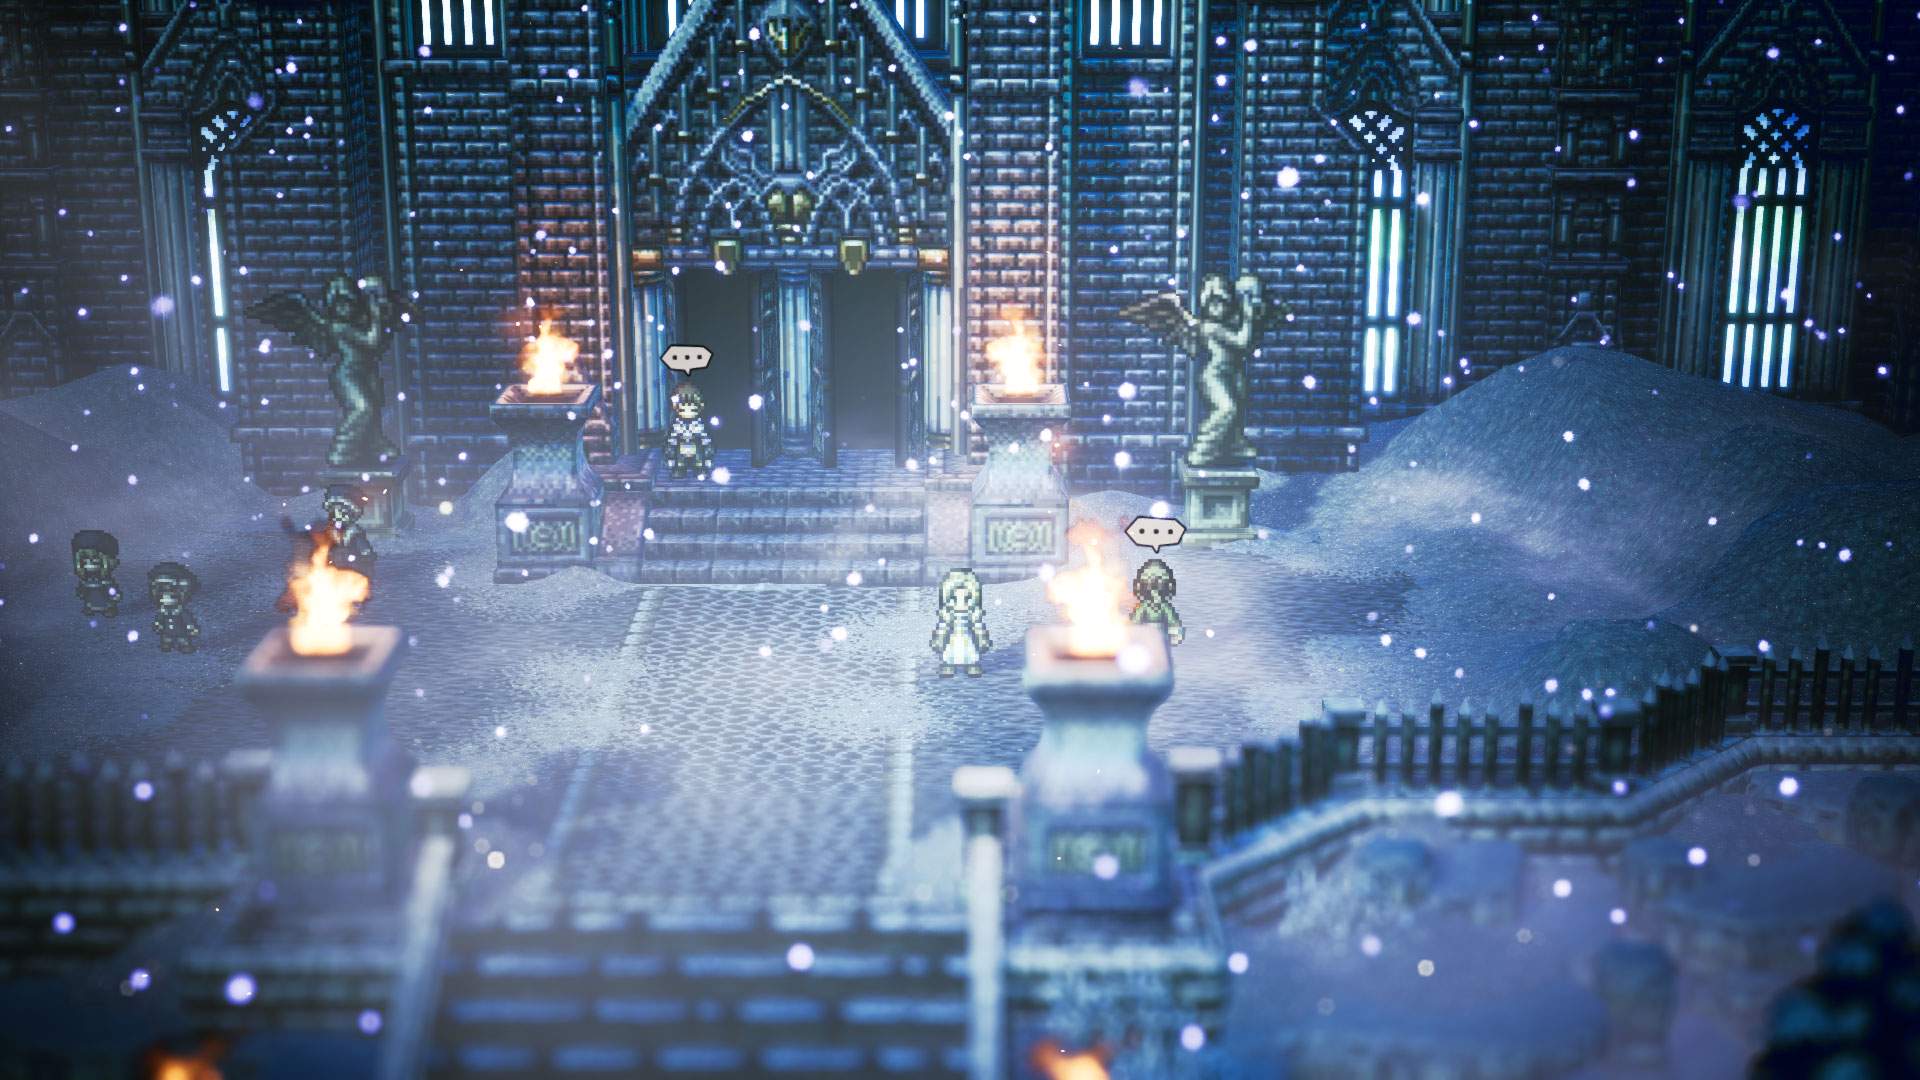 Gameplay screenshot showing Ophilia standing outside a large manor in town as it snows heavily.